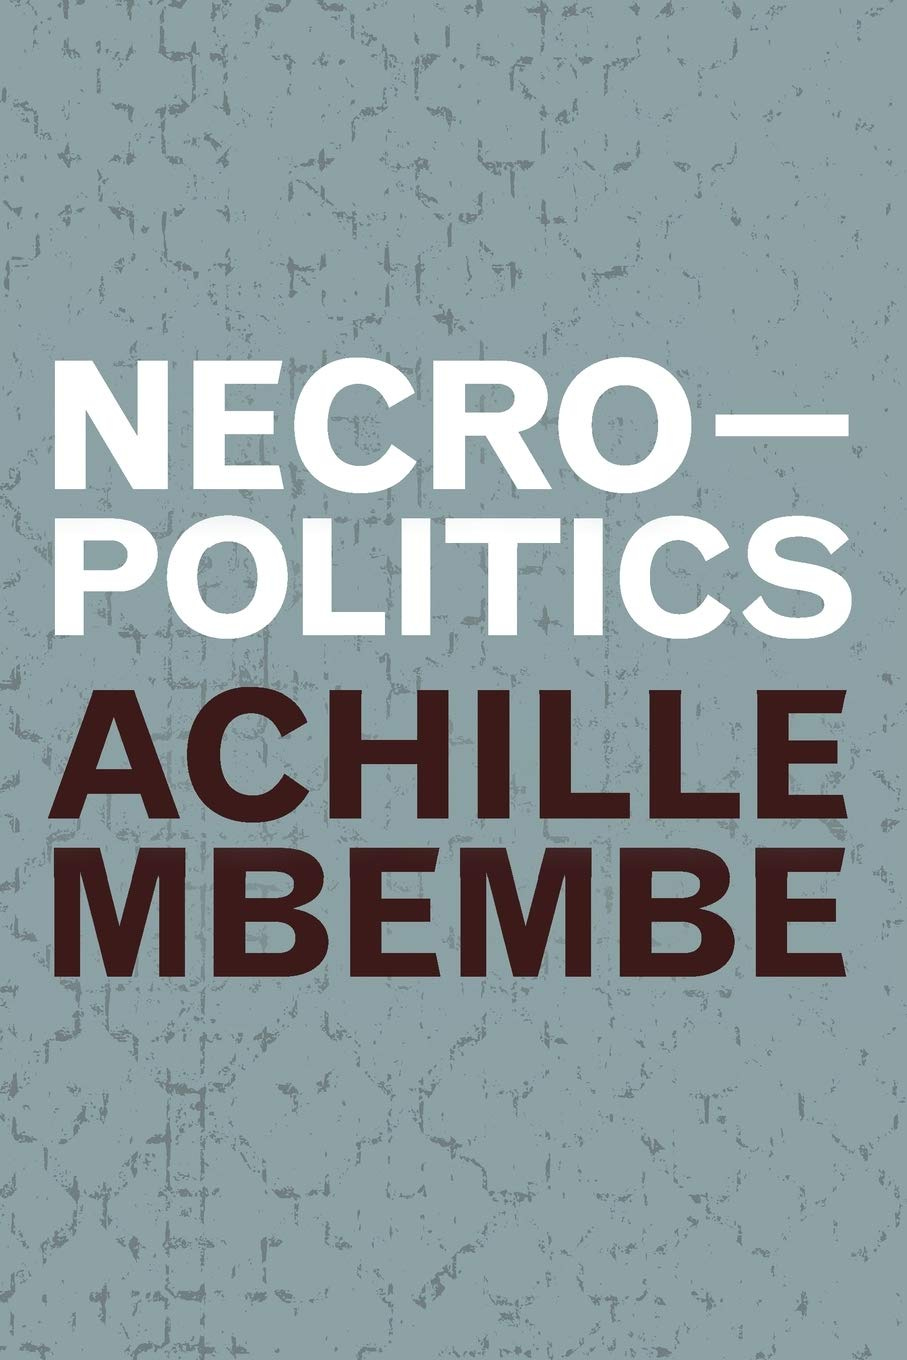 Necropolitics (Theory in Forms): Mbembe, Achille: 9781478006510:  Amazon.com: Books